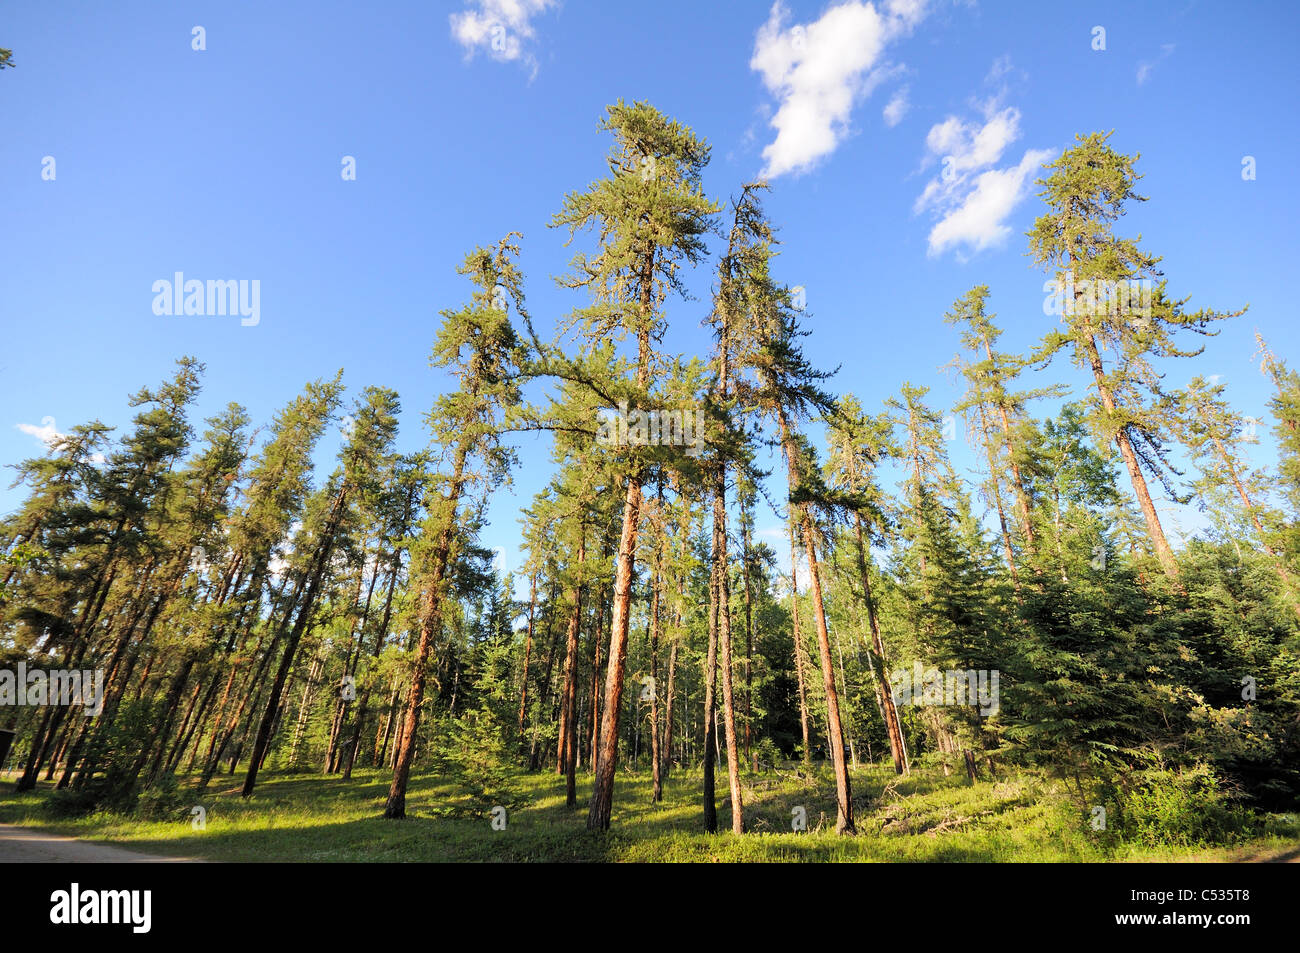 A peacefull and tranquil shot of Saskatchewan's boreal forest, Canada. Stock Photo